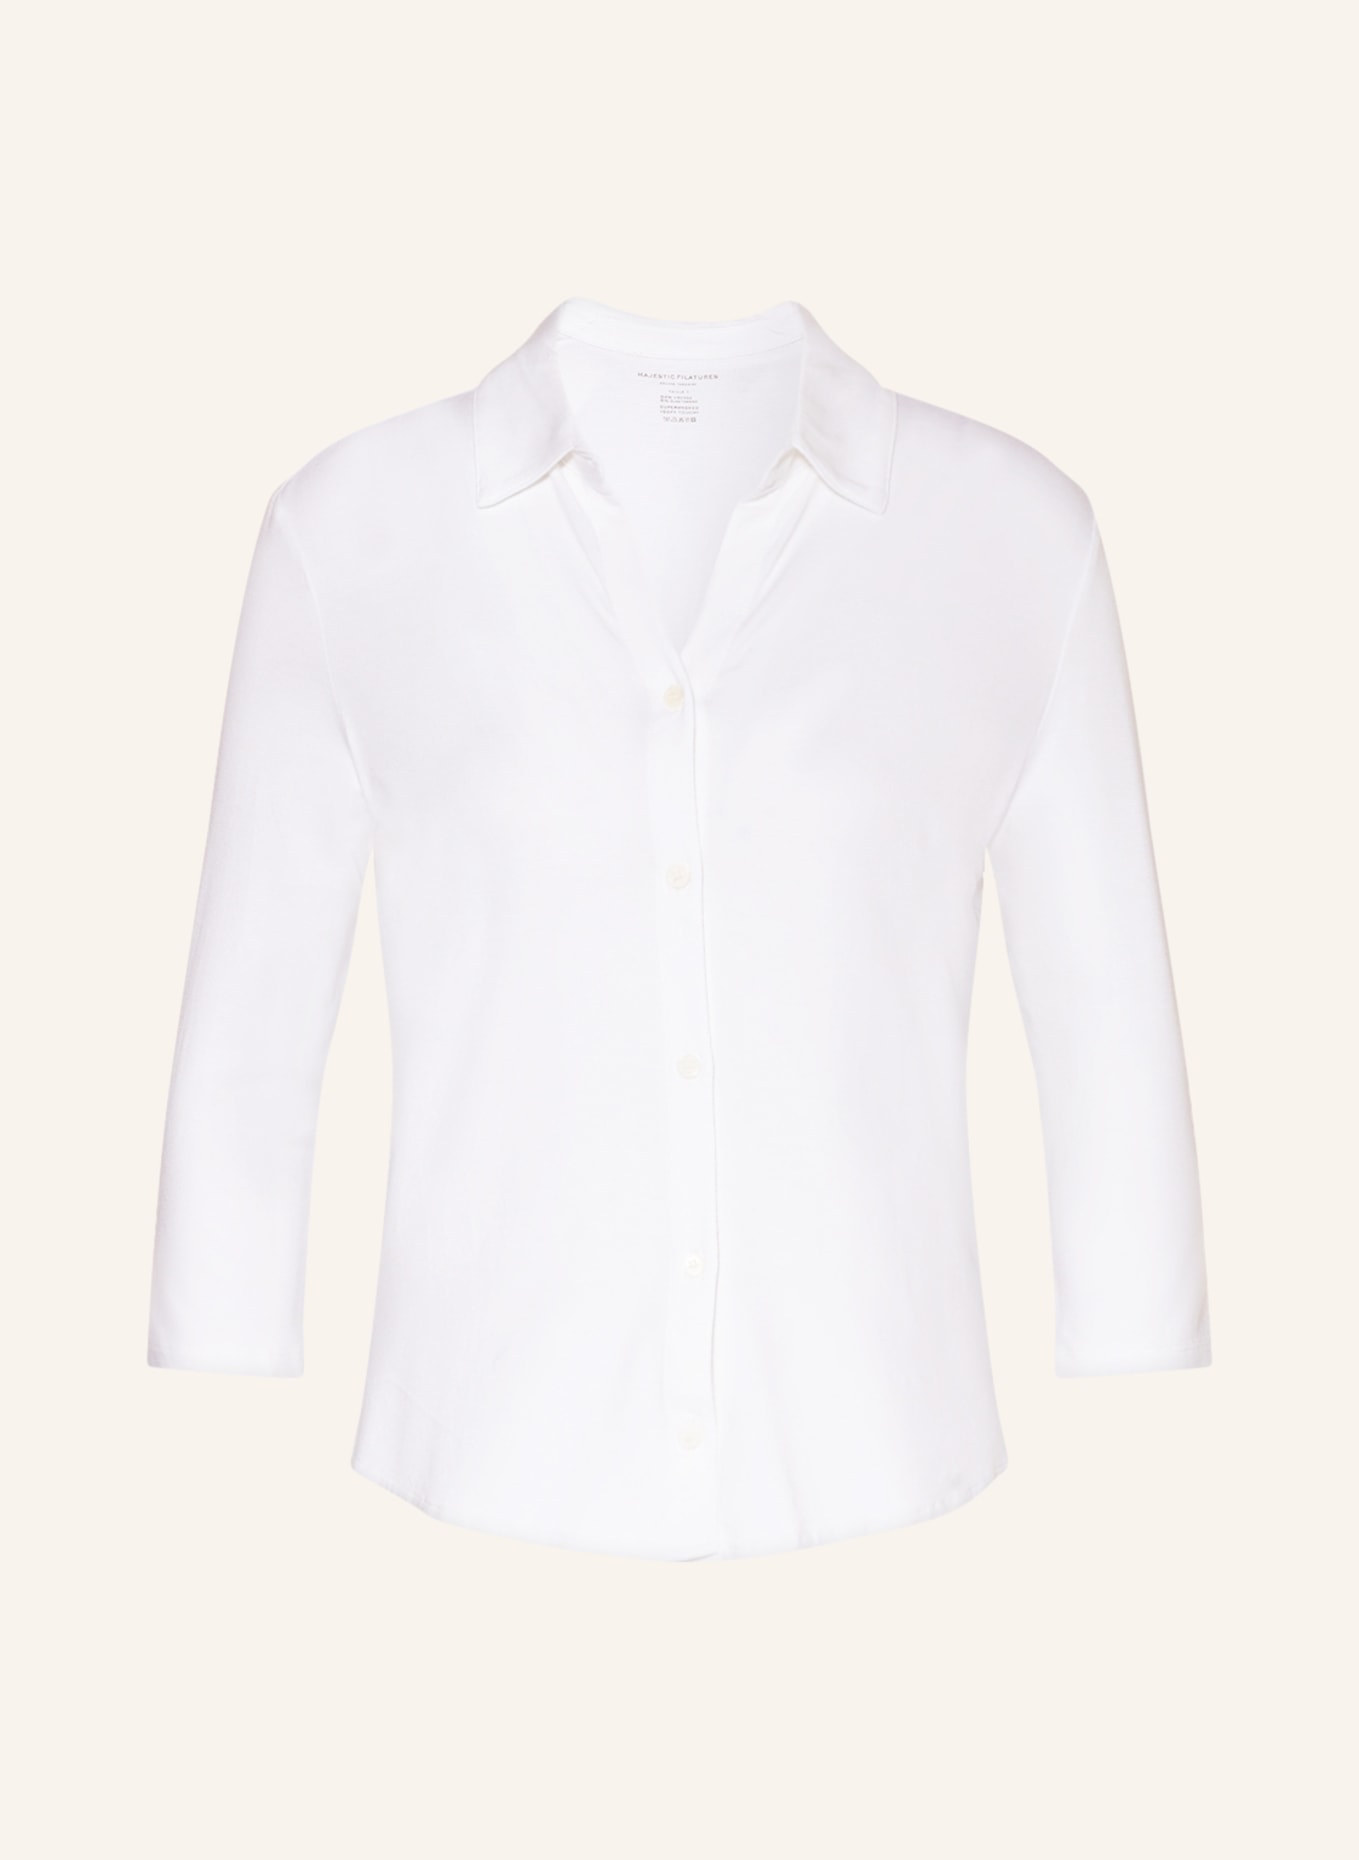 MAJESTIC FILATURES Cropped shirt blouse with 3/4 sleeves, Color: WHITE (Image 1)